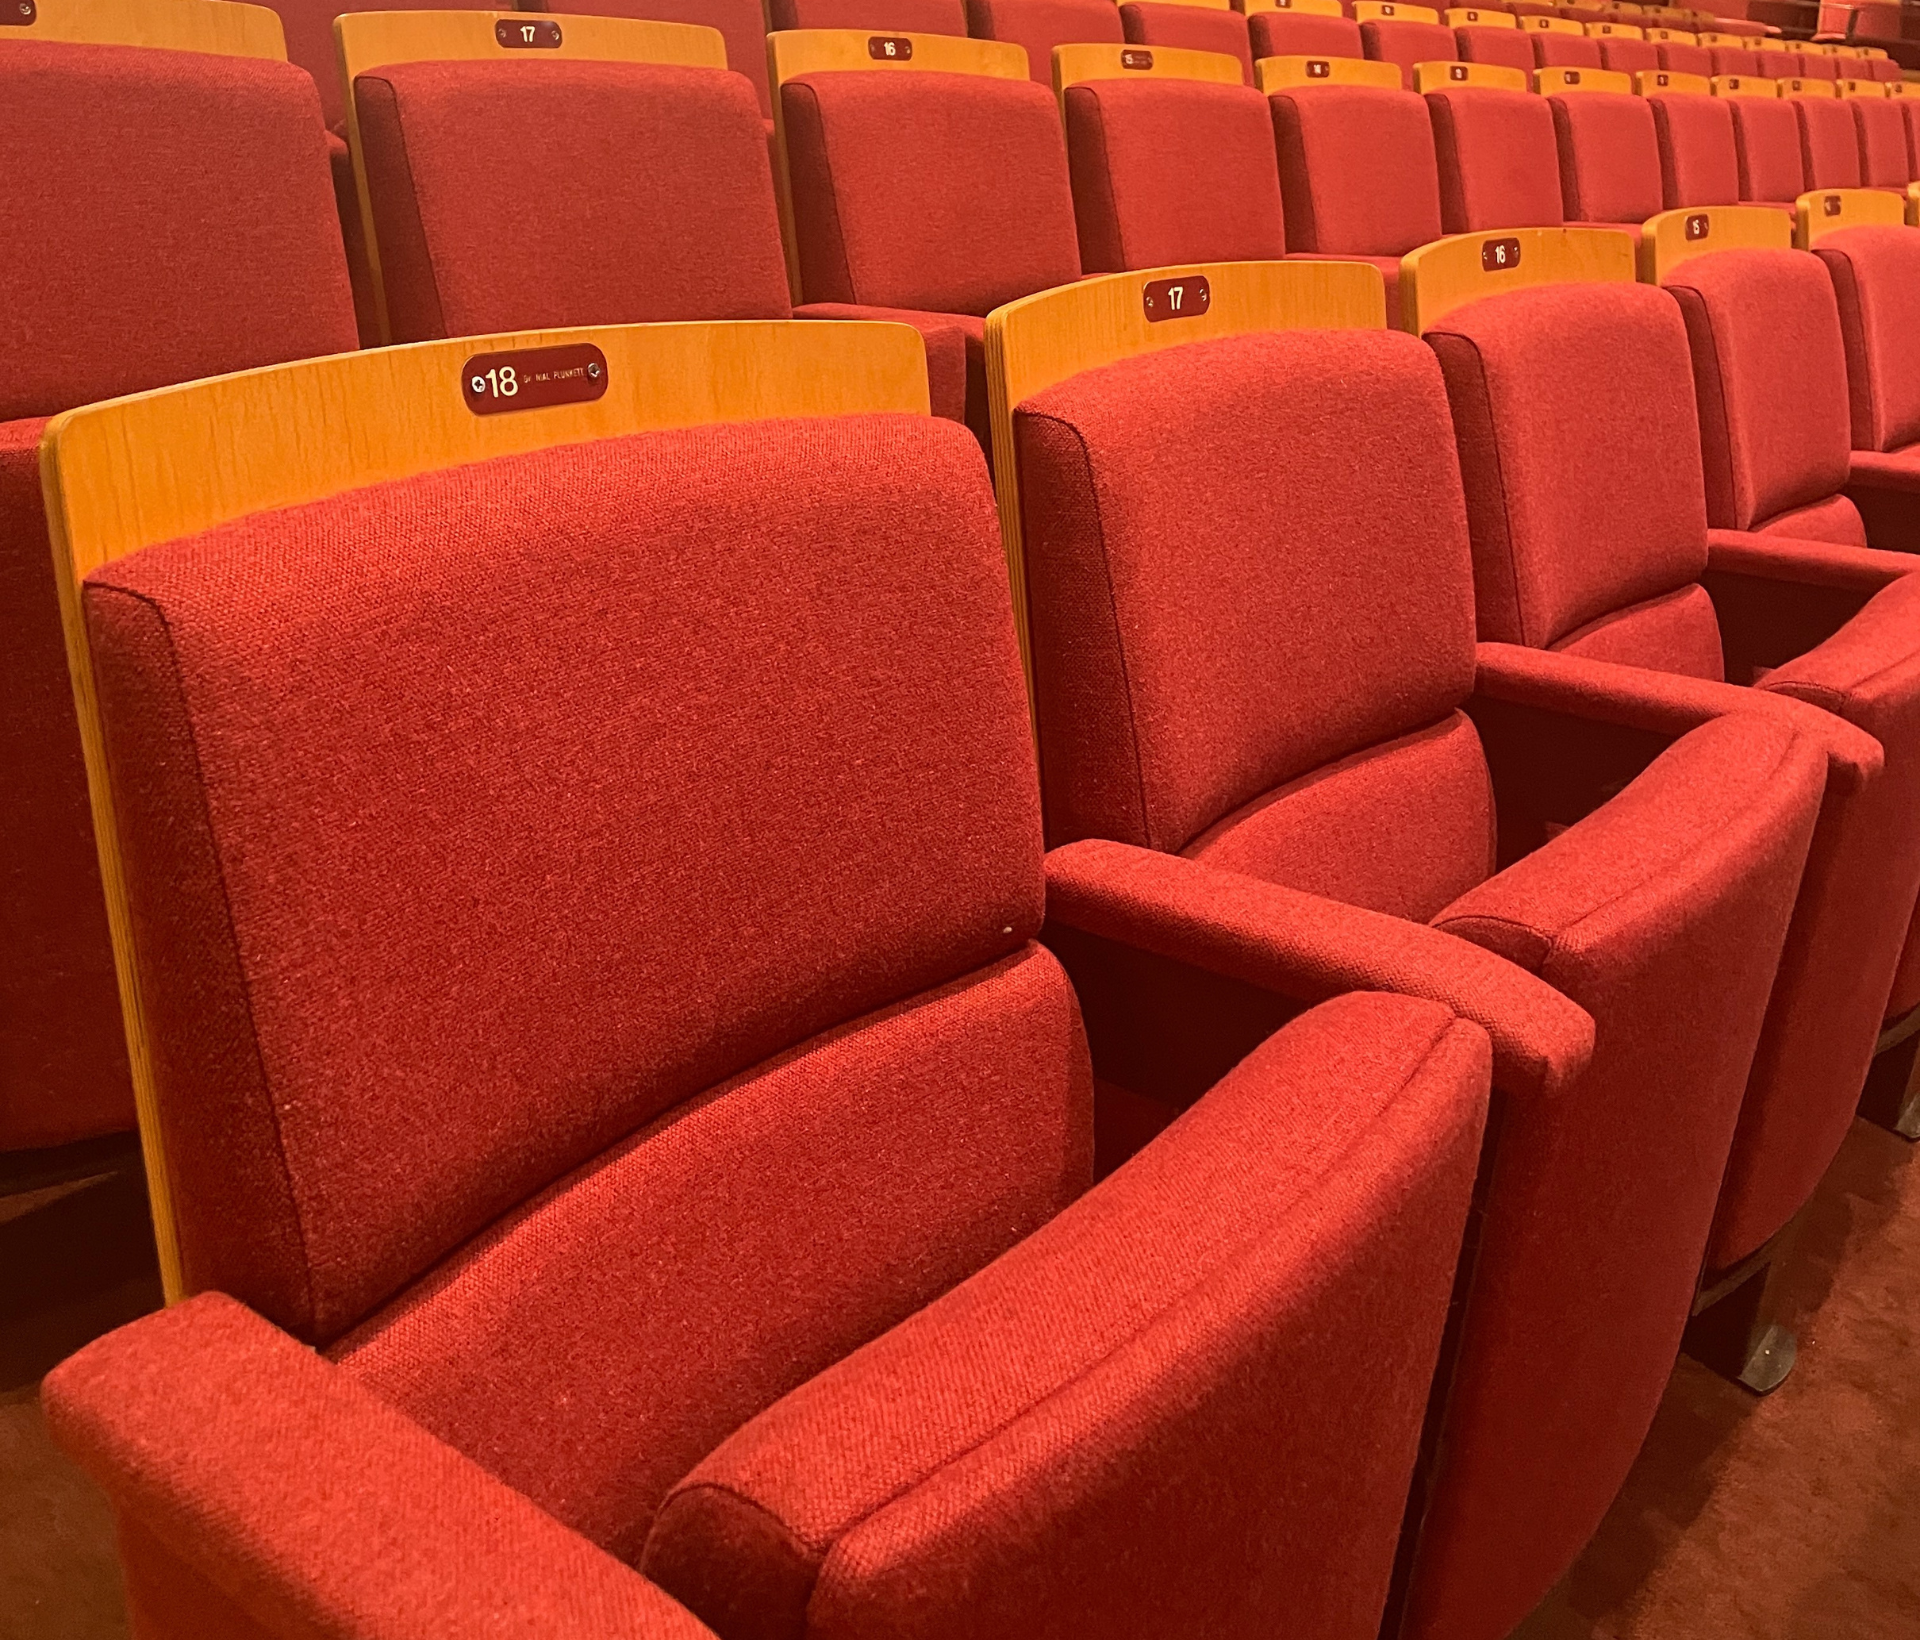 Rows of red tiered seating in an auditorium.